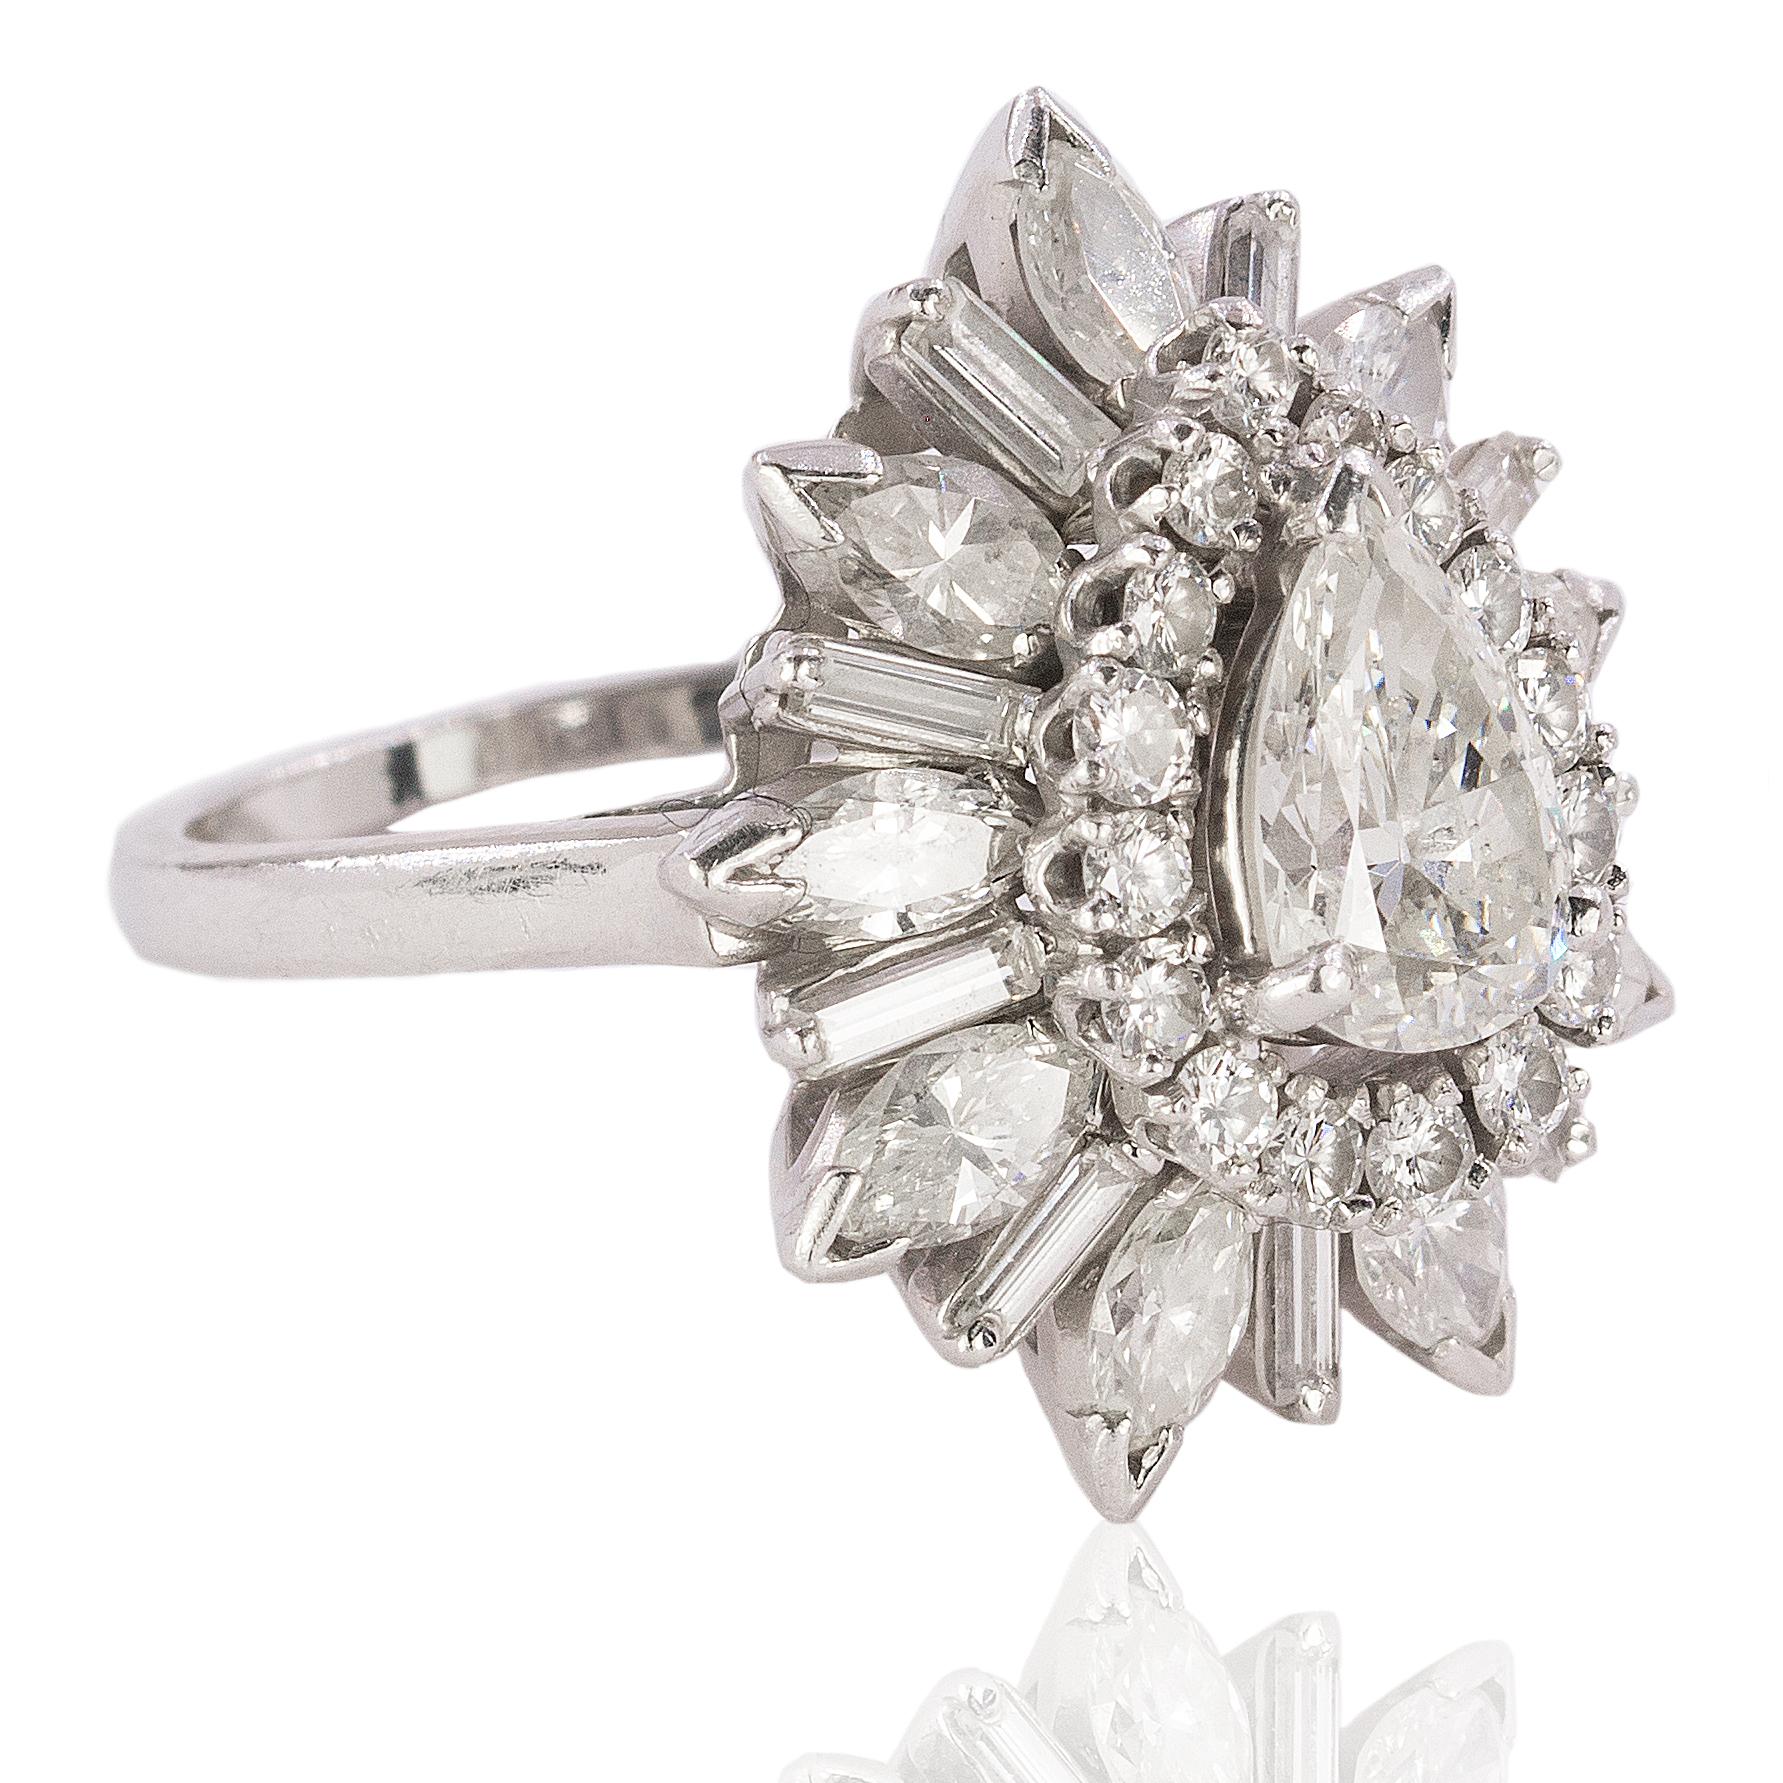 Platinum ring with approximately 1.25 carat pear shape high color, high clarity diamond and approximately 4.00 carats of round, marquis and baguette cut diamonds. 12.56g